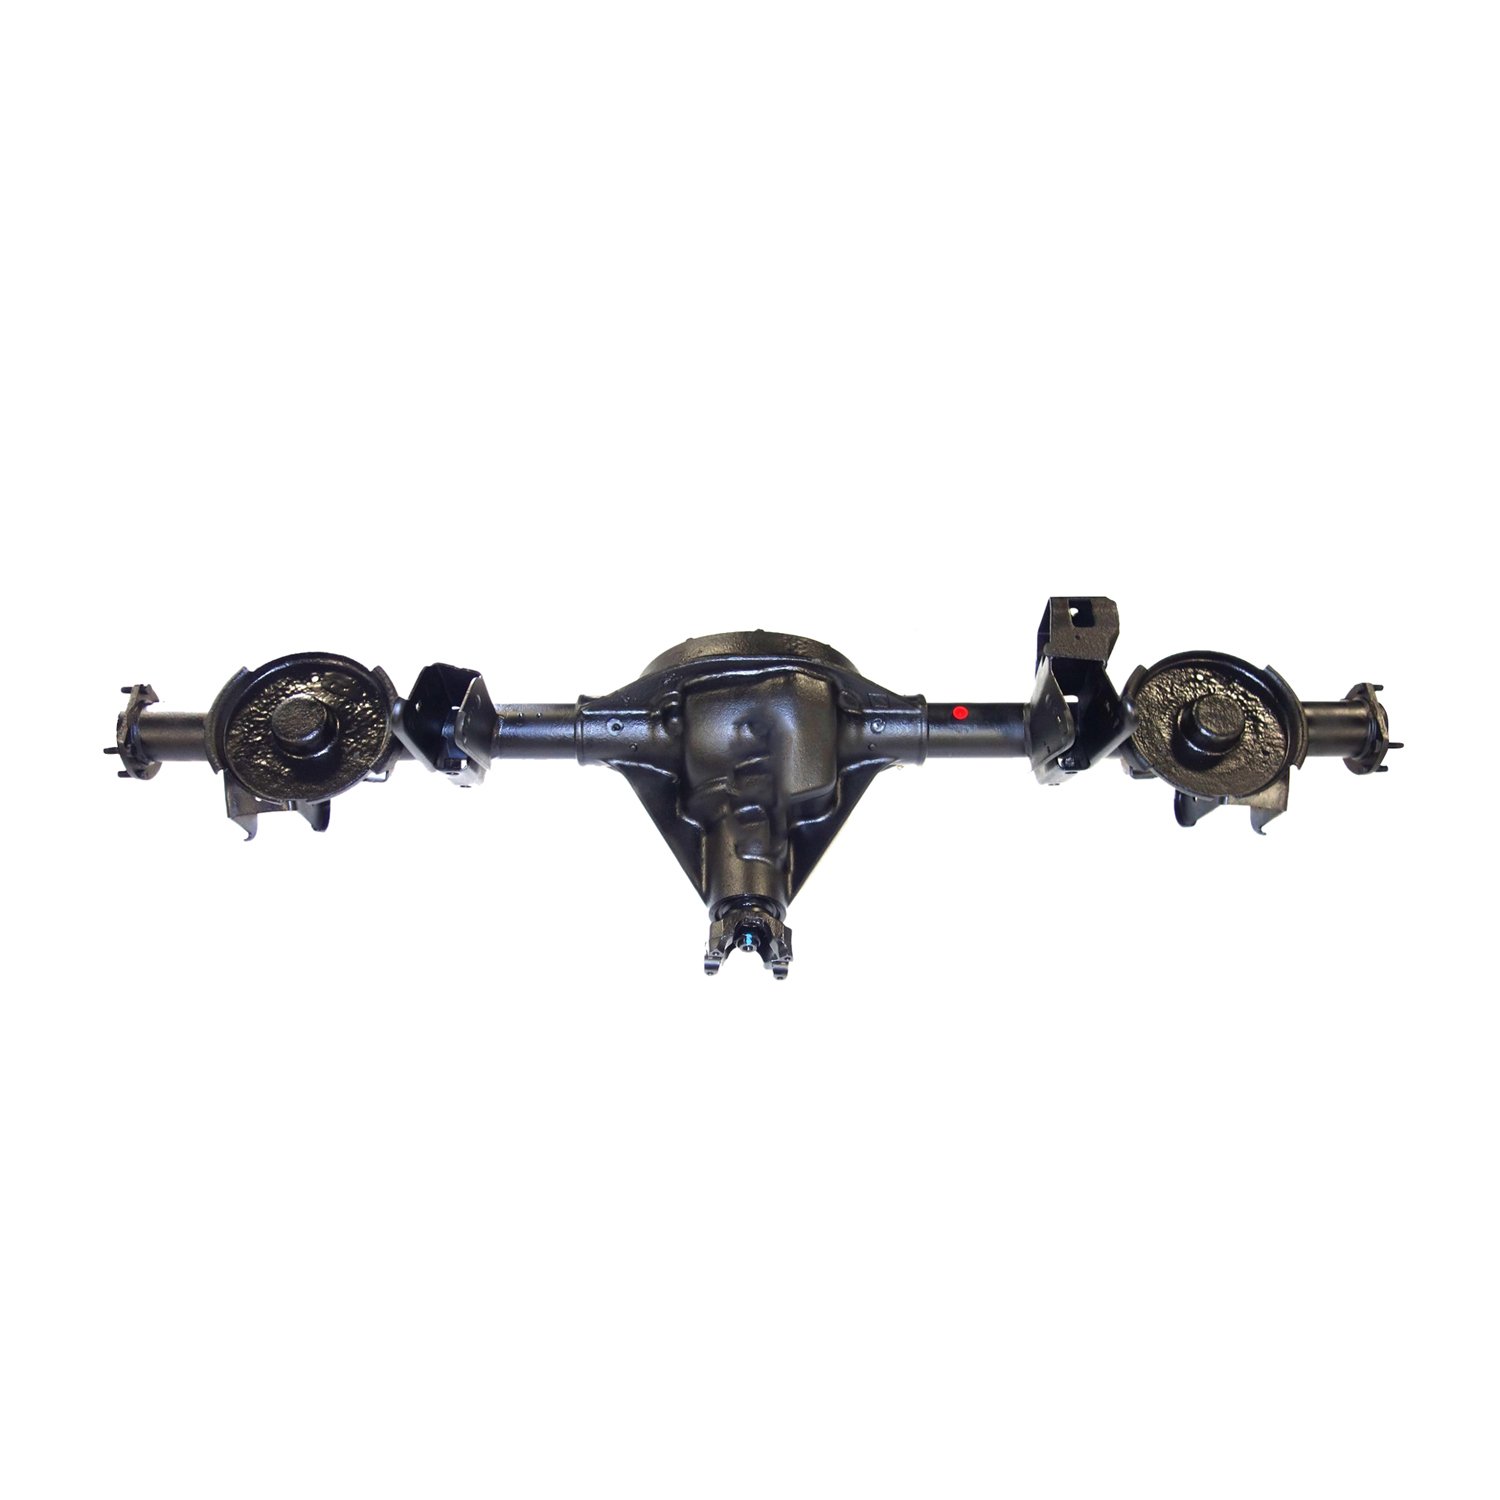 Remanufactured Complete Axle Assembly for Dana 35 03-05 Wrangler 3.73 , ABS, Posi LSD